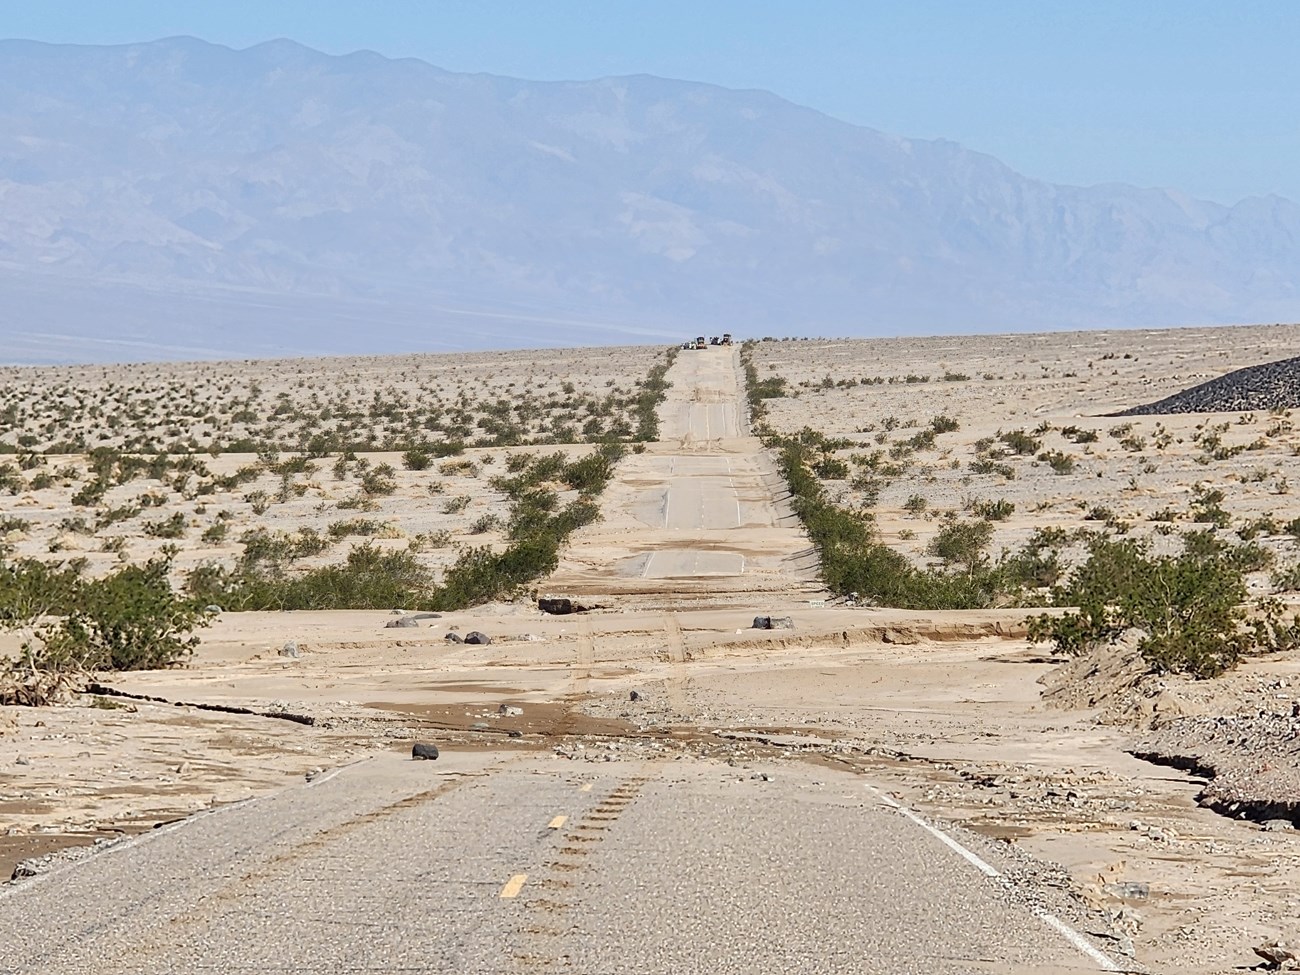 Photo of a road partially covered by sand and gravel. Just the top of a white speed limit sign is sticking out of the debris on the right side of the road.